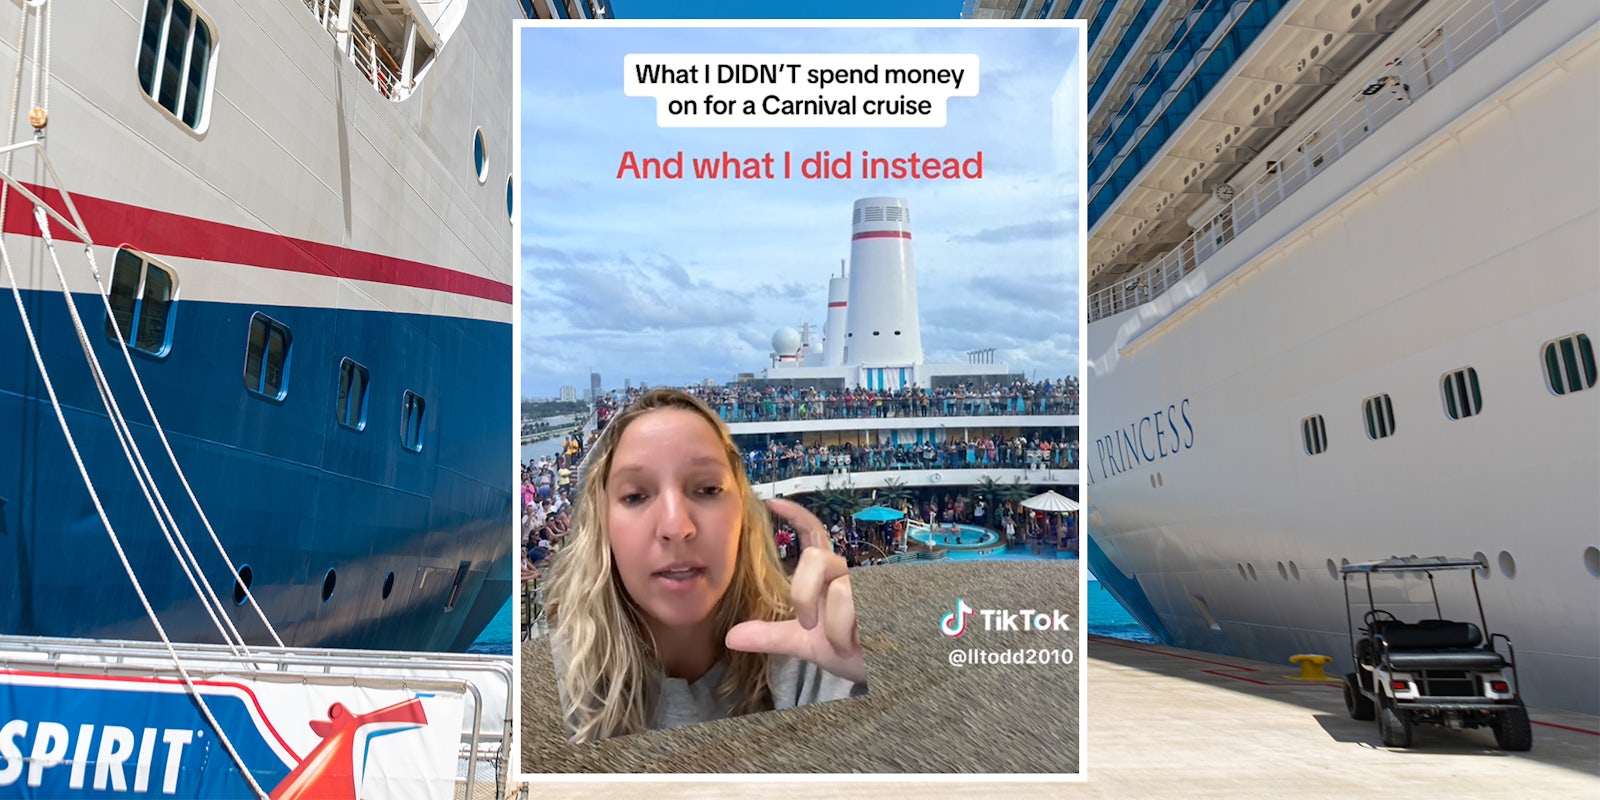 young woman with cruise ship in background, caption 'What I DIDN'T spend money on for a Carnival cruise And what I did instead' (inset) Carnival and Princess Cruise ships (background)